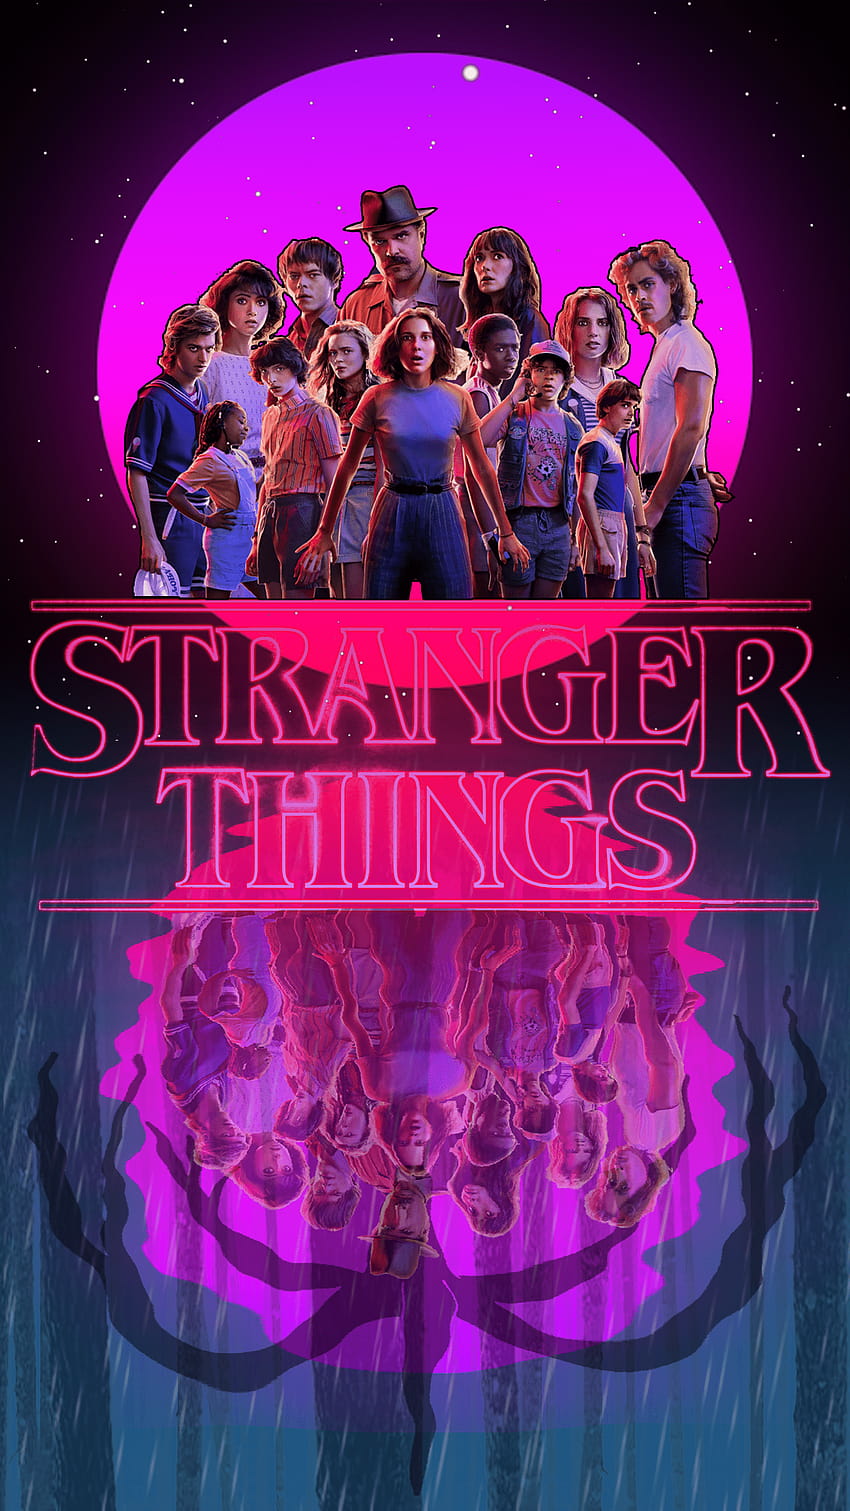 10 Awesome Stranger Things Wallpapers  There are others 1  Fab Mood   Wedding Colours Wedding Themes Wedding colour palettes